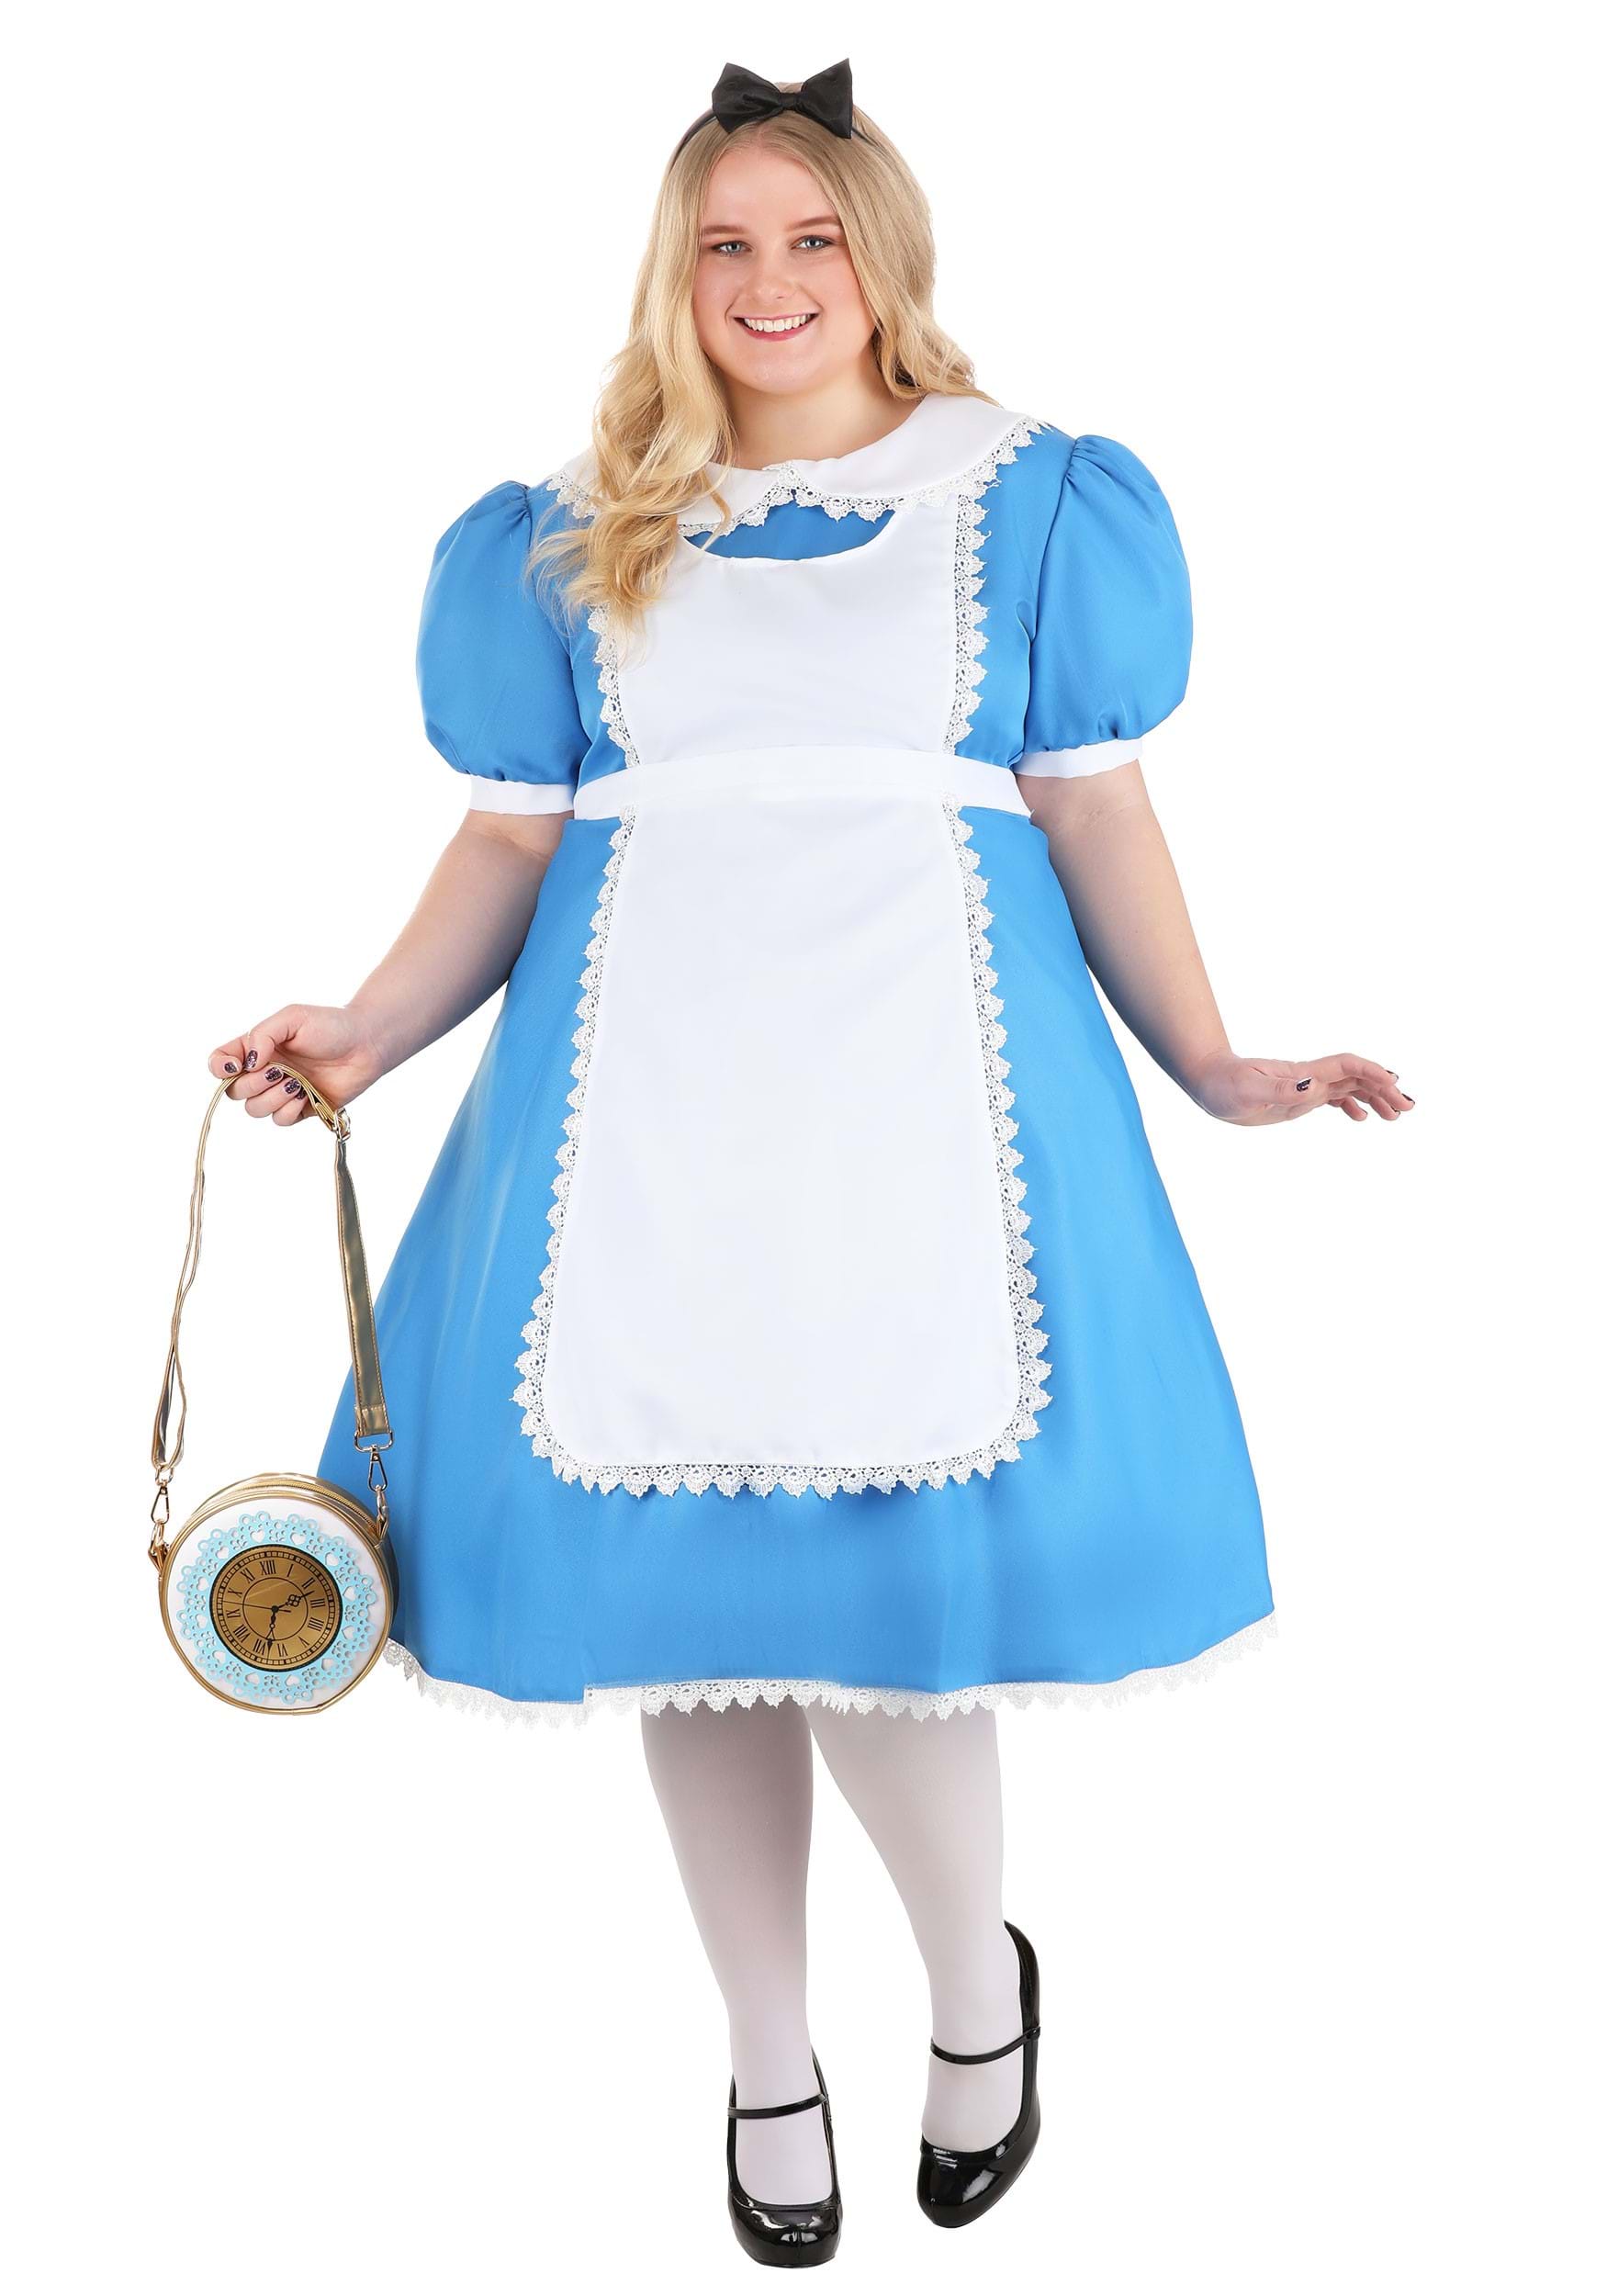 https://images.halloweencostumes.com/products/34030/1-1/plus-size-supreme-alice-costume-update-main.jpg